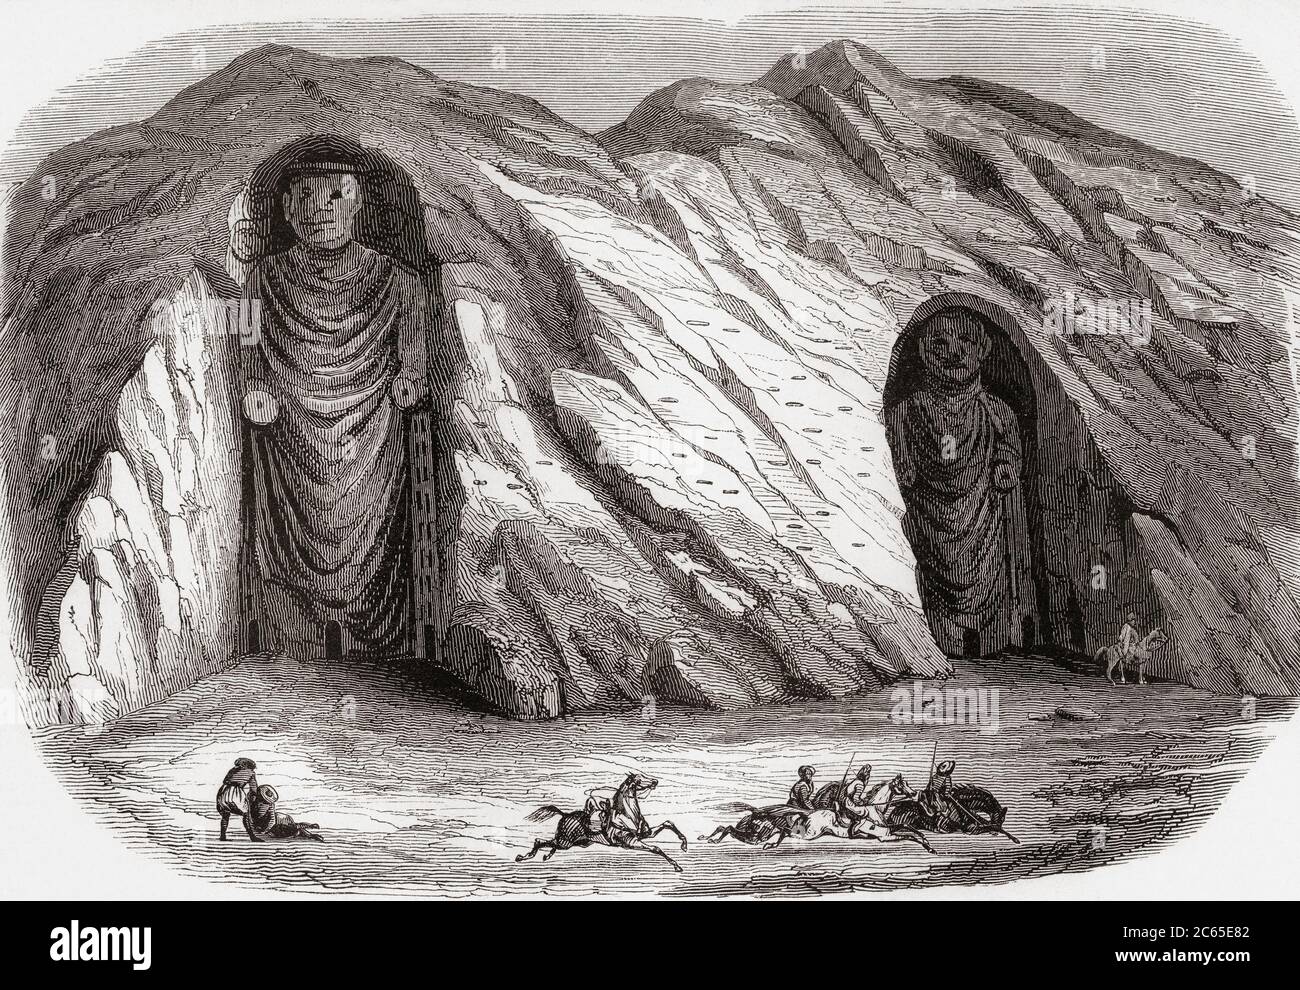 The Buddhas of Bamyan, Bamyan valley, Hazarajat region, central Afghanistan, seen here in the 19th century. The statues were destroyed by the Taliban in 2001.  From Monuments de Tous les Peuples, published 1843. Stock Photo